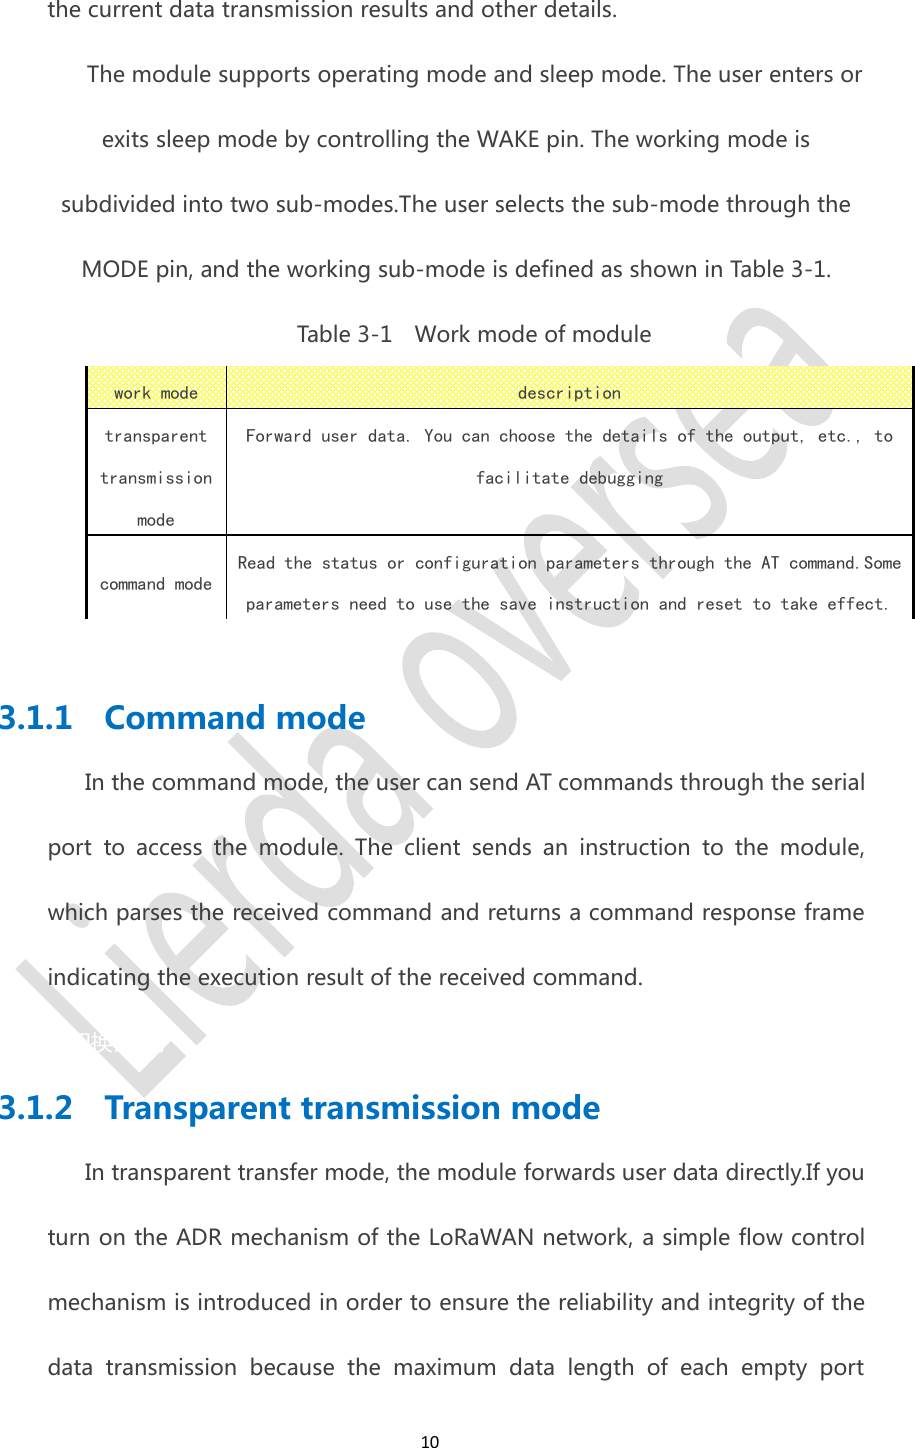 10the current data transmission results and other details.The module supports operating mode and sleep mode. The user enters orexits sleep mode by controlling the WAKE pin. The working mode issubdivided into two sub-modes.The user selects the sub-mode through theMODE pin, and the working sub-mode is defined as shown in Table 3-1.Table 3-1 Work mode of modulework modedescriptiontransparenttransmissionmodeForward user data. You can choose the details of the output, etc., tofacilitate debuggingcommand modeRead the status or configuration parameters through the AT command.Someparameters need to use the save instruction and reset to take effect.3.1.1 Command modeIn the command mode, the user can send AT commands through the serialport to access the module. The client sends an instruction to the module,which parses the received command and returns a command response frameindicating the execution result of the received command.2 完成后,再处理这个模式切换请求。3.1.2 Transparent transmission modeIn transparent transfer mode, the module forwards user data directly.If youturn on the ADR mechanism of the LoRaWAN network, a simple flow controlmechanism is introduced in order to ensure the reliability and integrity of thedata transmission because the maximum data length of each empty port